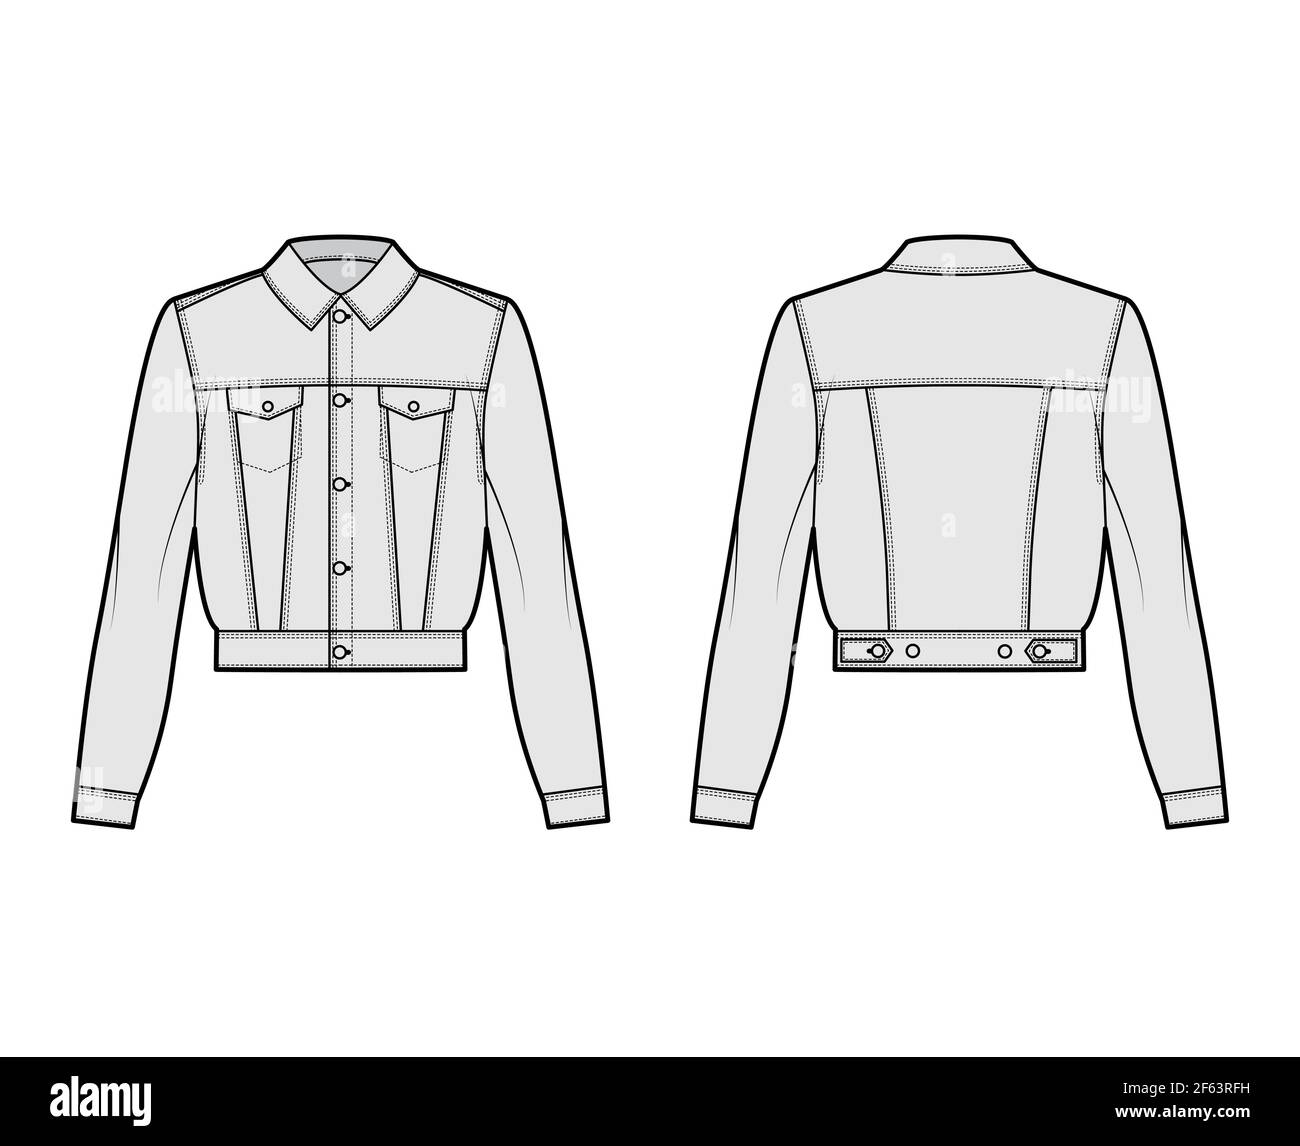 Cropped denim jacket technical fashion illustration with full waist length,  fitted body, flap pockets, button closure, classic collar. Flat front,  back, grey color style. Women, men unisex CAD mockup Stock Vector Image